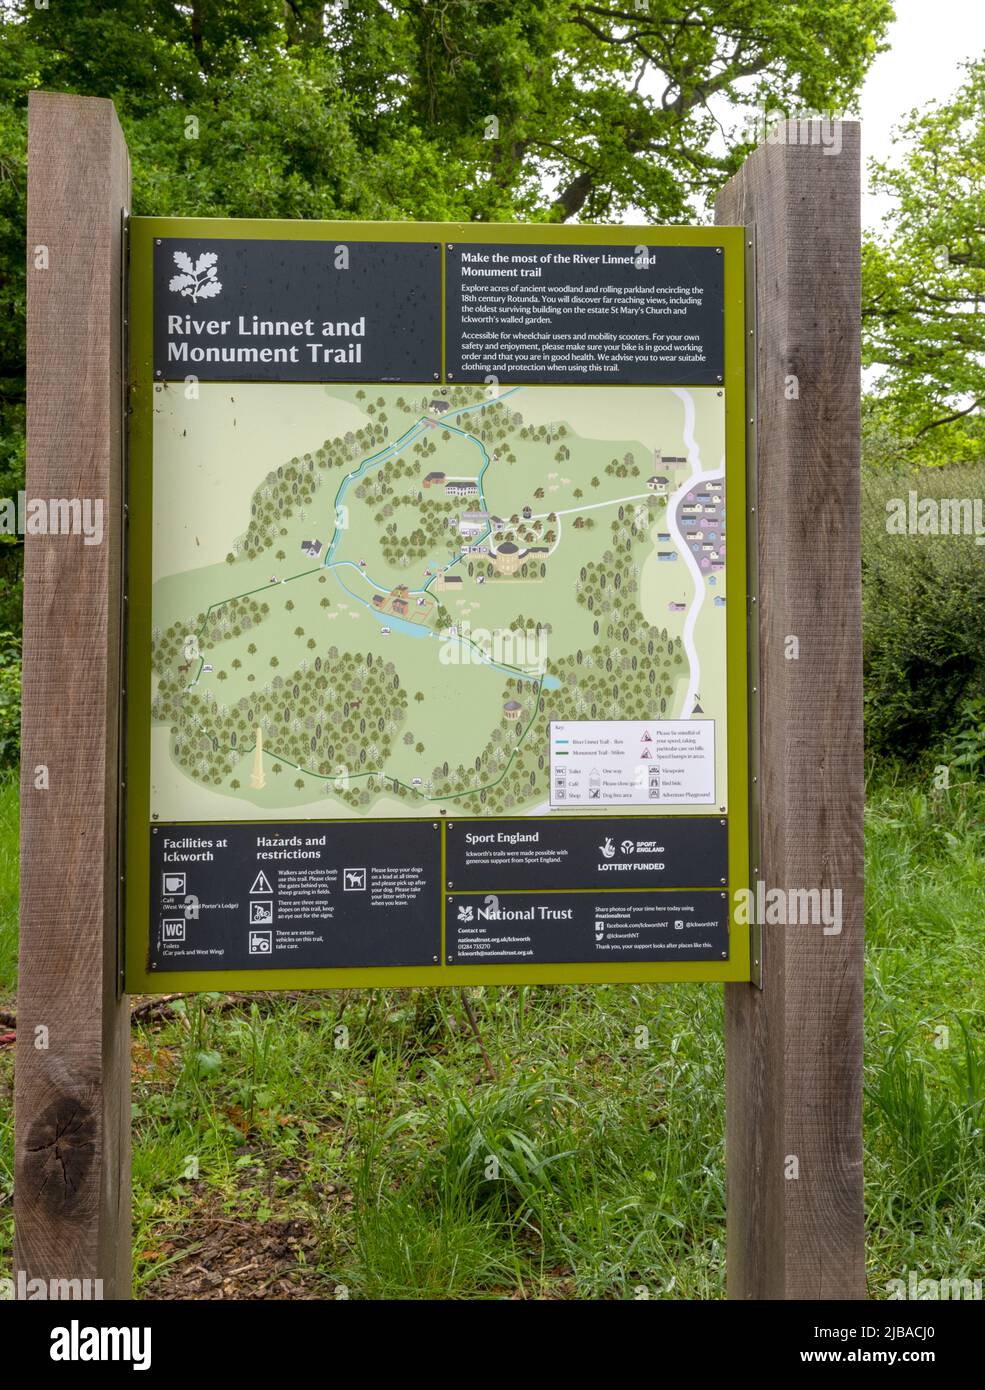 National Trust tourist information board at the River Linnet and Monument Trail, Ickworth, West Suffolk, England, UK Stock Photo